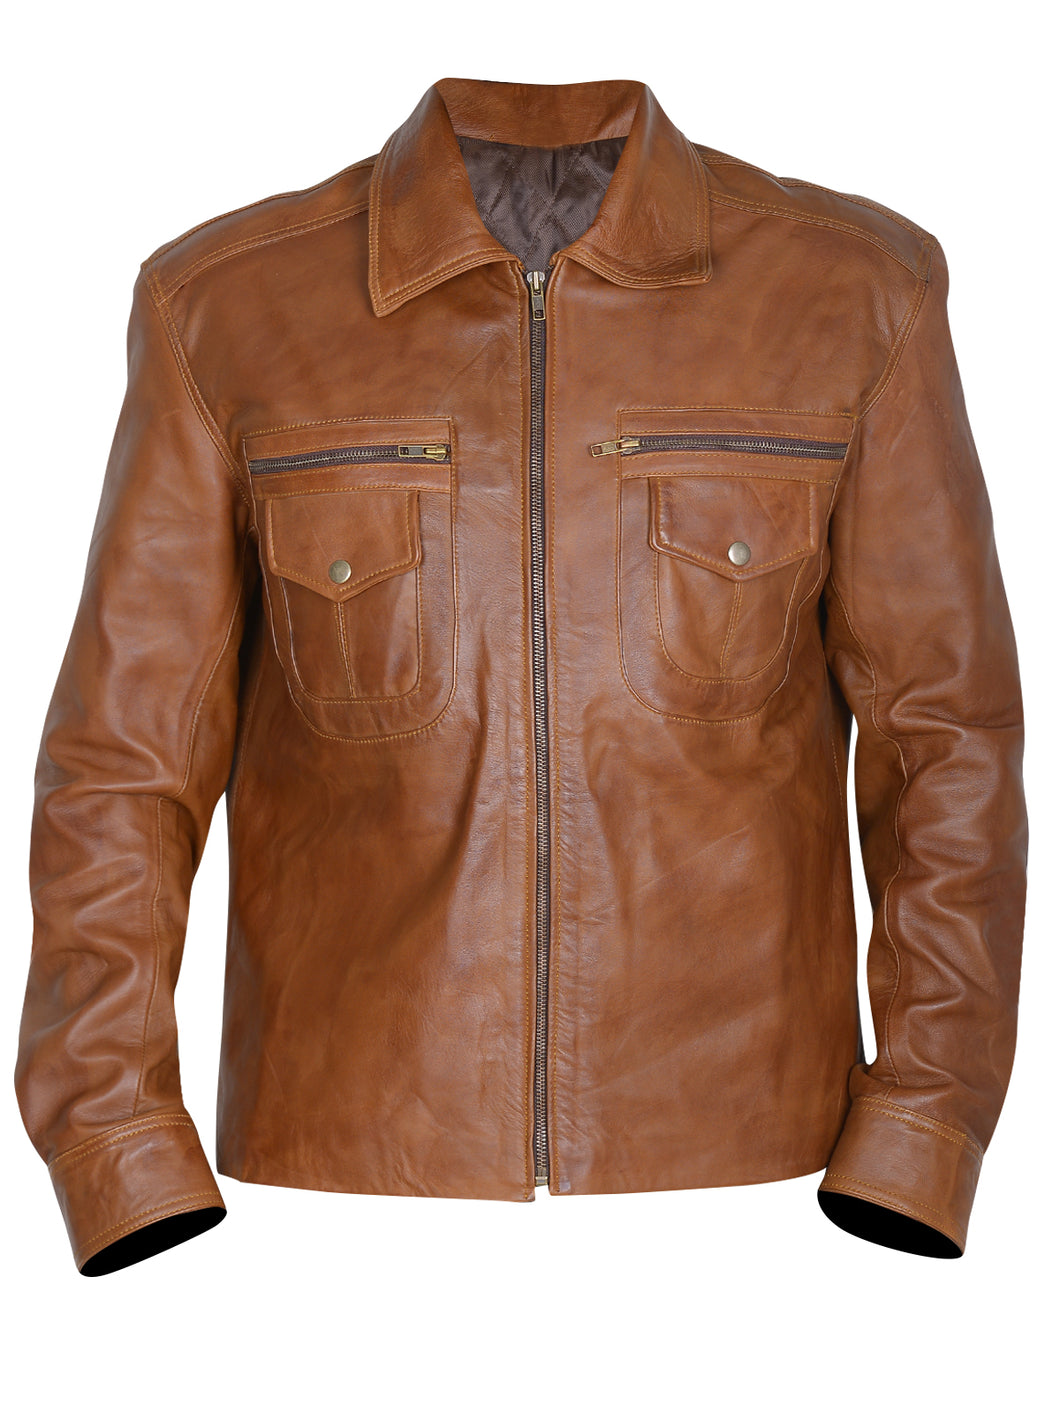 Nestor Carbonell Sheriff Alex Brown Leather Jacket